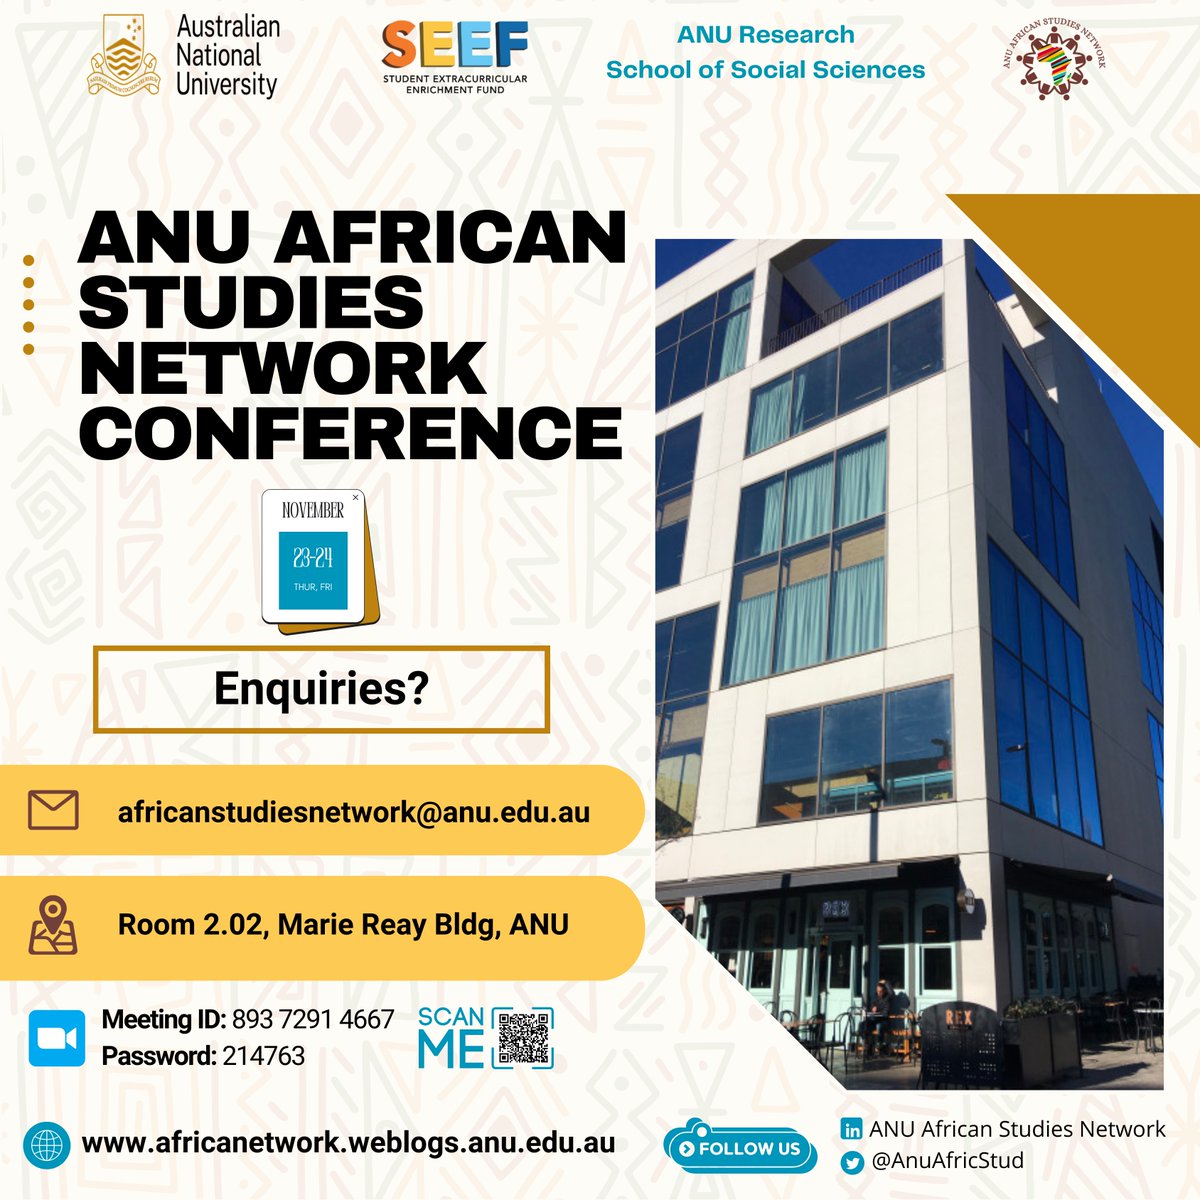 In just two days, the highly anticipated ANU African Studies Network Conference will commence. 

You have the option to join in person at the Marie Reay Building Room 2.02 on the ANU campus, or virtually via Zoom.

See you soon!

#ANU #AfricanStudiesNetwork #2023Conference
👇🏿👇🏿